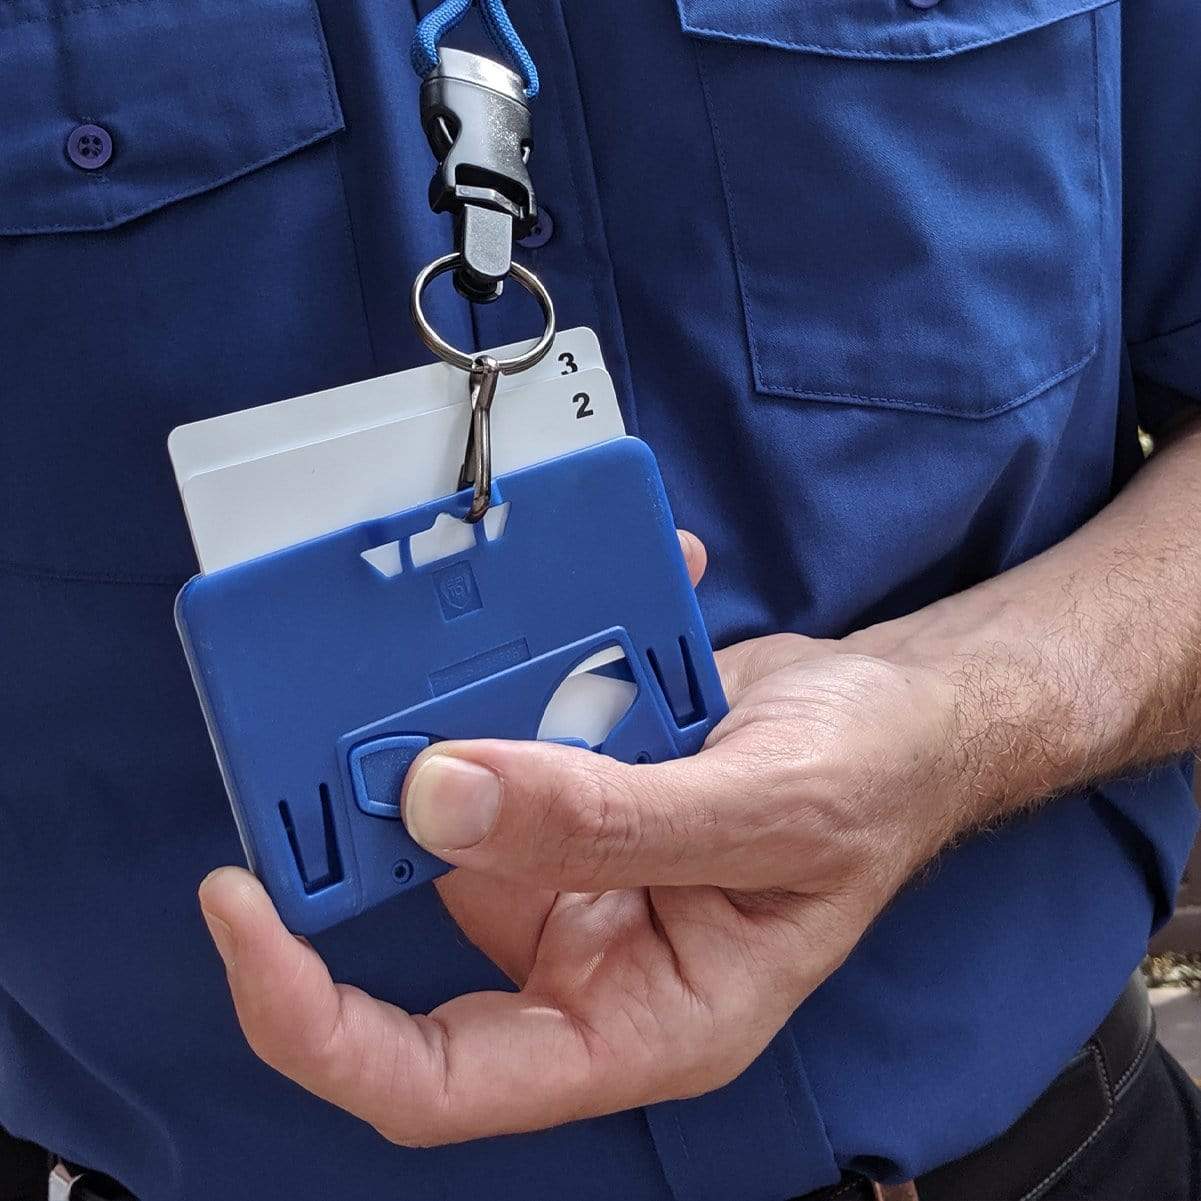 Person in professional work wear featuring a blue shirt, holding a Specialist ID Horizontal 3 Card Badge Holder & Heavy Duty Lanyard with Breakaway Clip and Key Ring - Hard Plastic Rigid Name Tag Protector -Top Load for Three Badges with two cards visible.